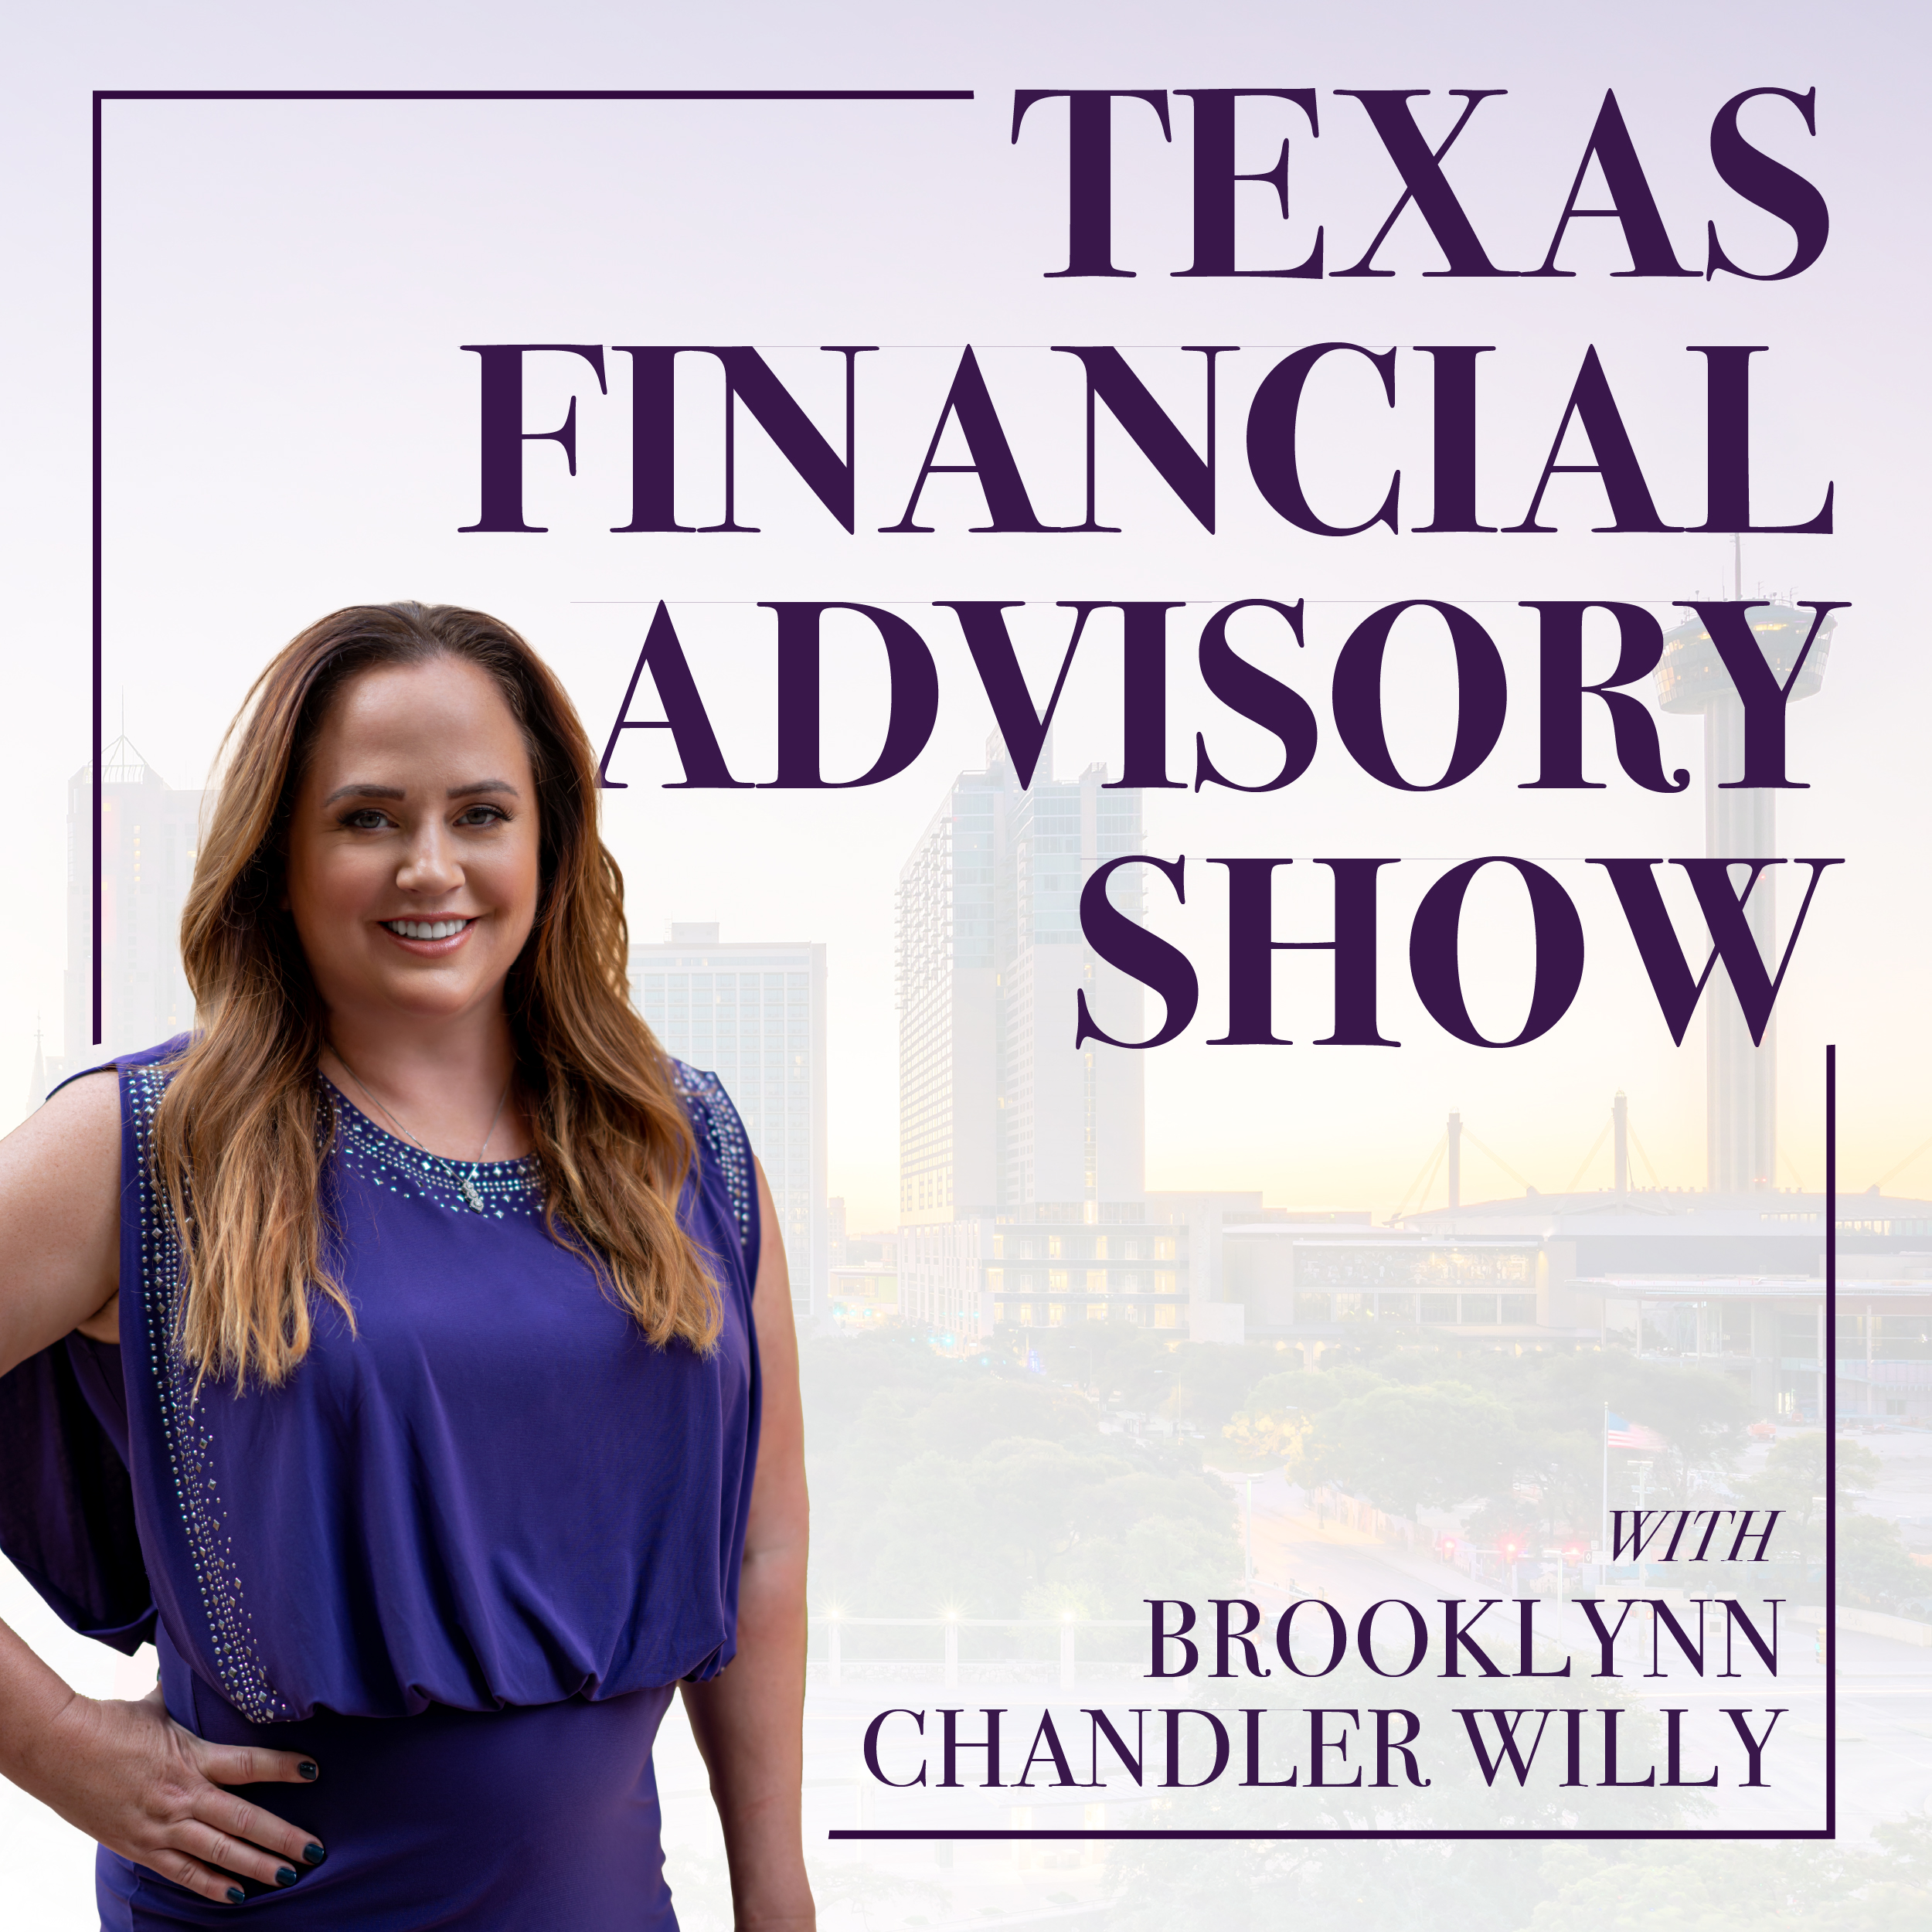 Texas Financial Advisory Estate Planning 101. That's the topic this week and estate planning specialist Rudy Wolf has some great suggestions.